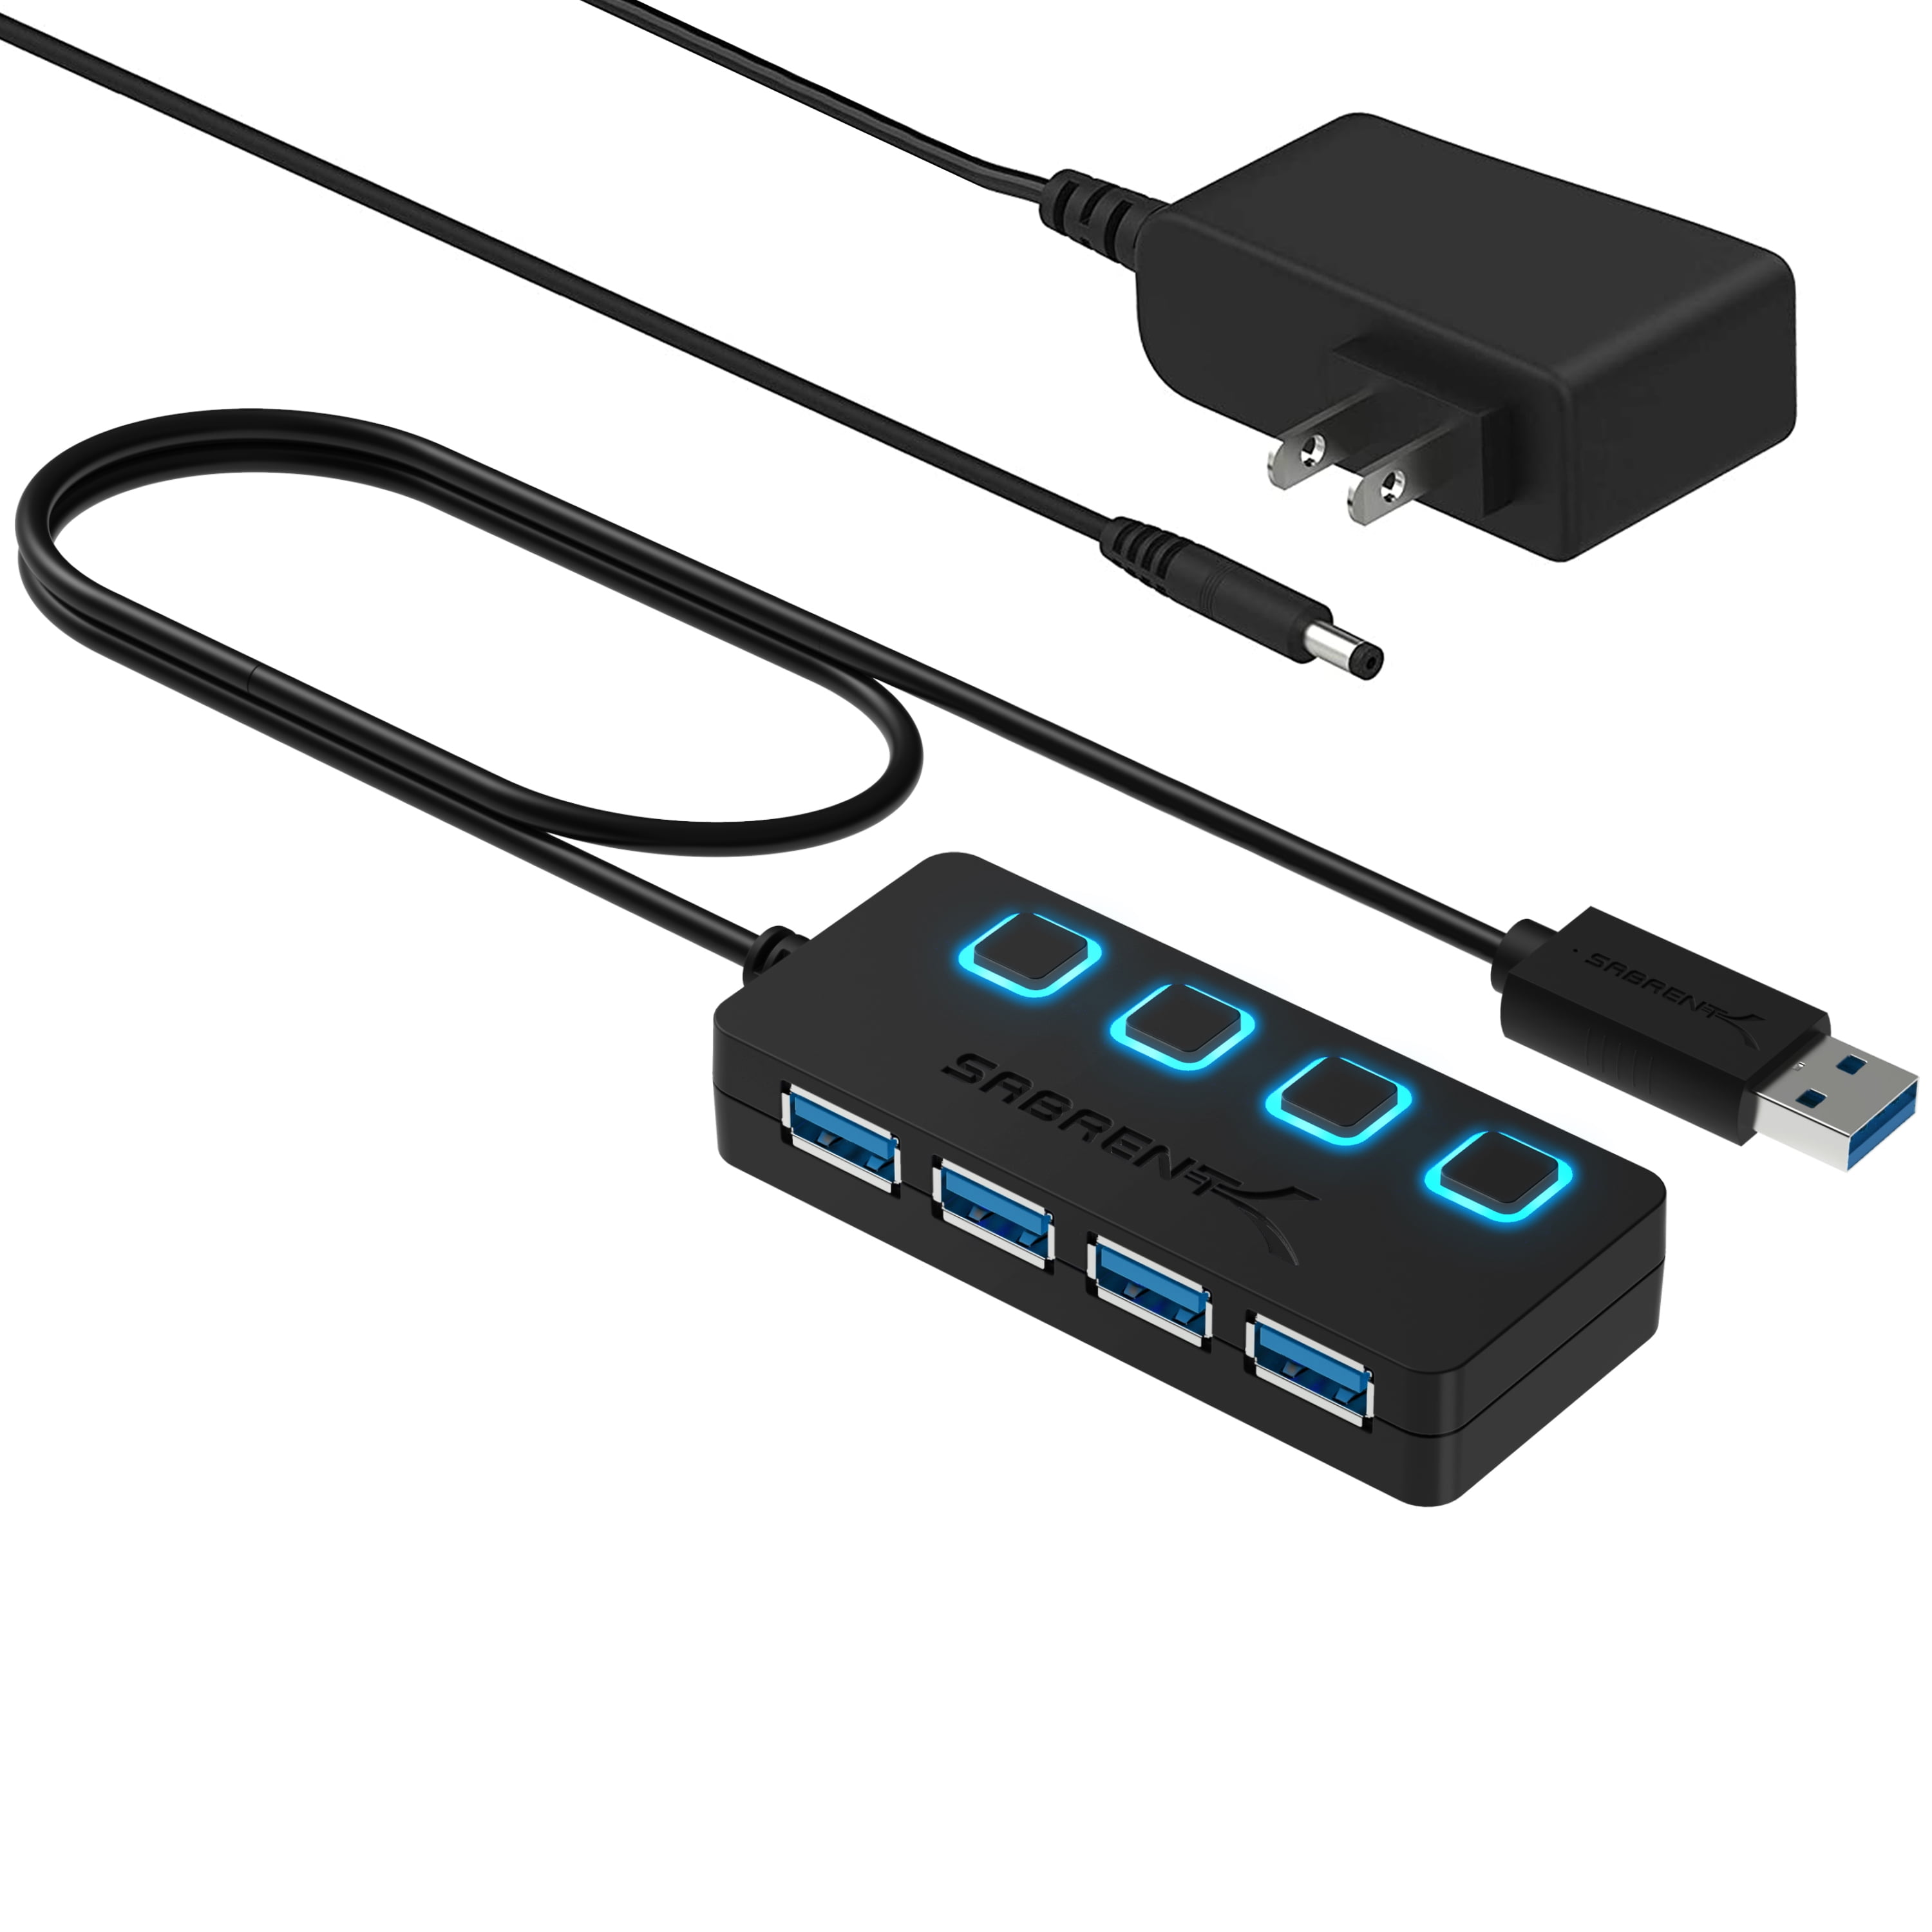 Sabrent 4-Port USB 3.0 Hub with Individual LED Lit Power Switches, Included Power Adapter (HB-UMP3) - Walmart.com